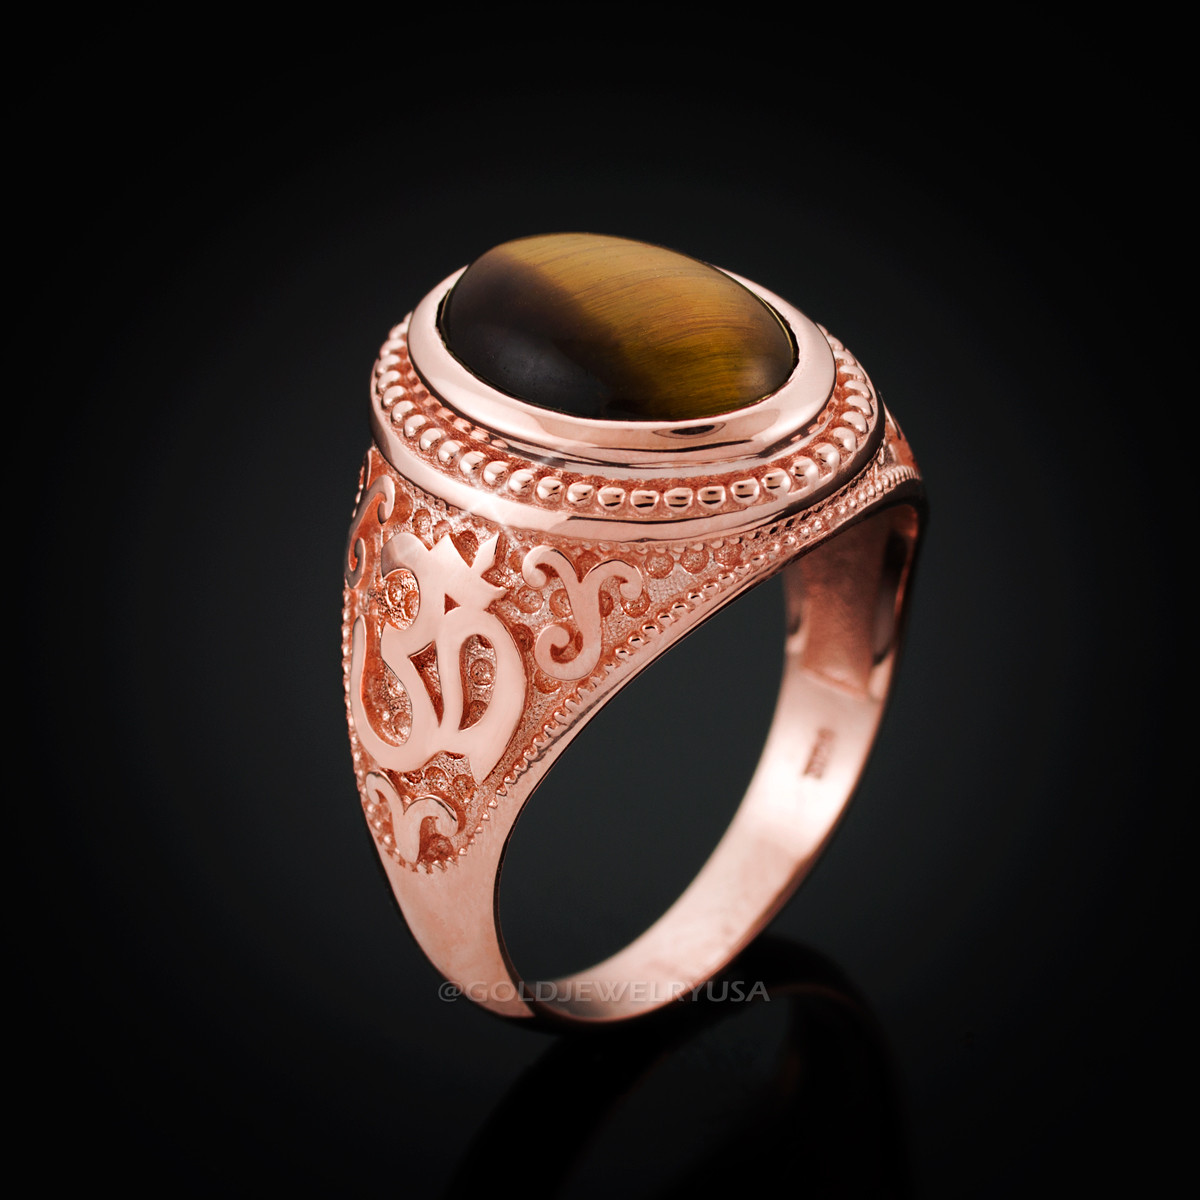 Buy Rose Gold Rings for Men by Malabar Gold & Diamonds Online | Ajio.com